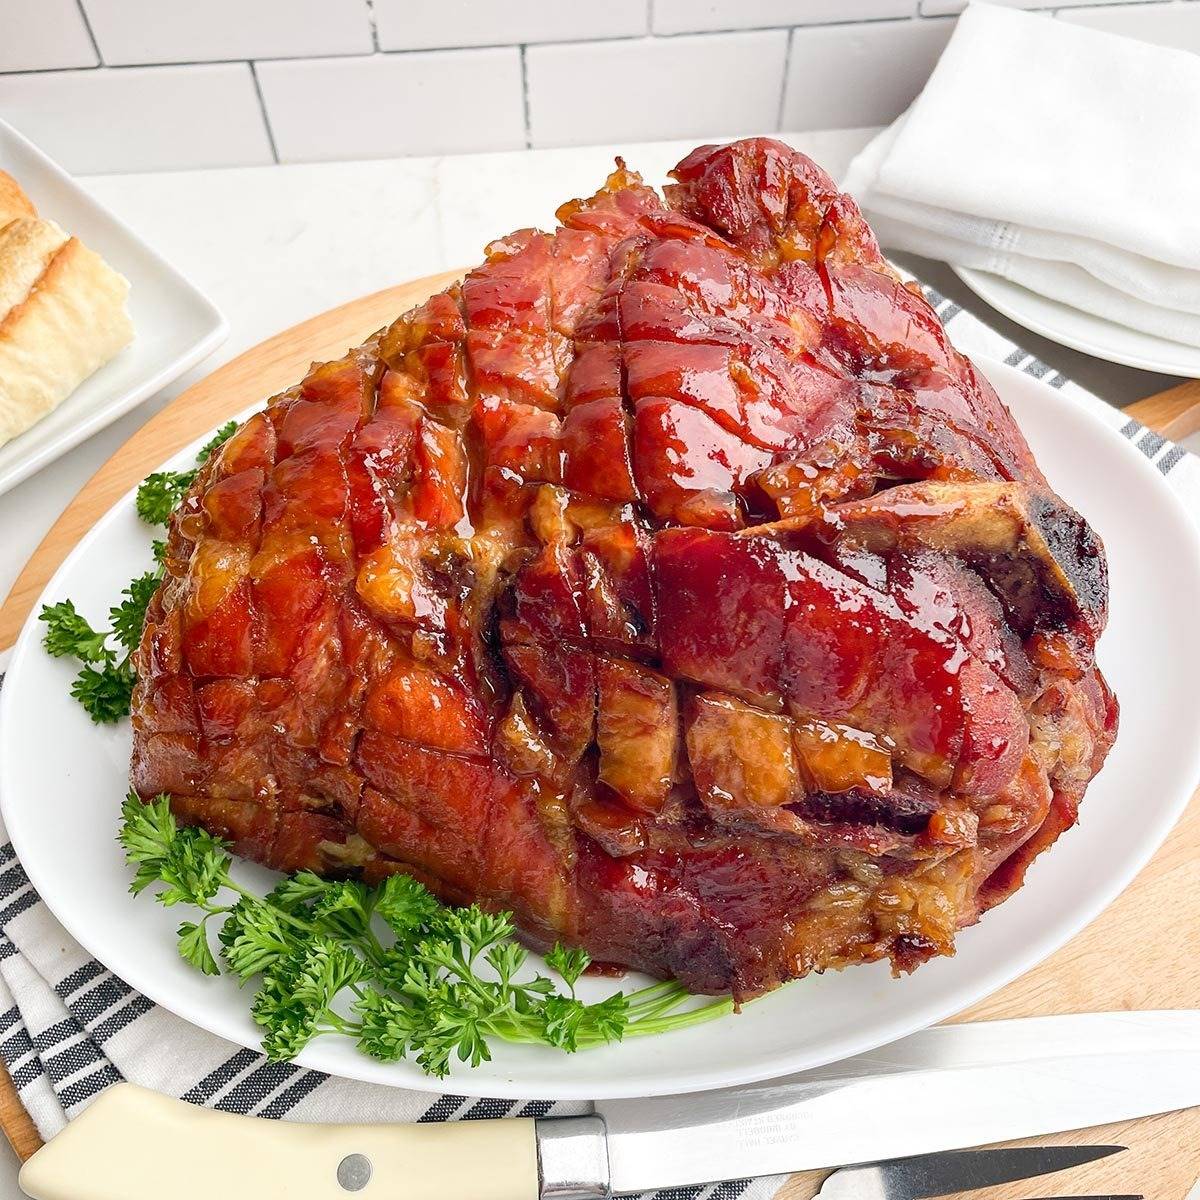 How To Cook A Ham In A Roaster Oven 